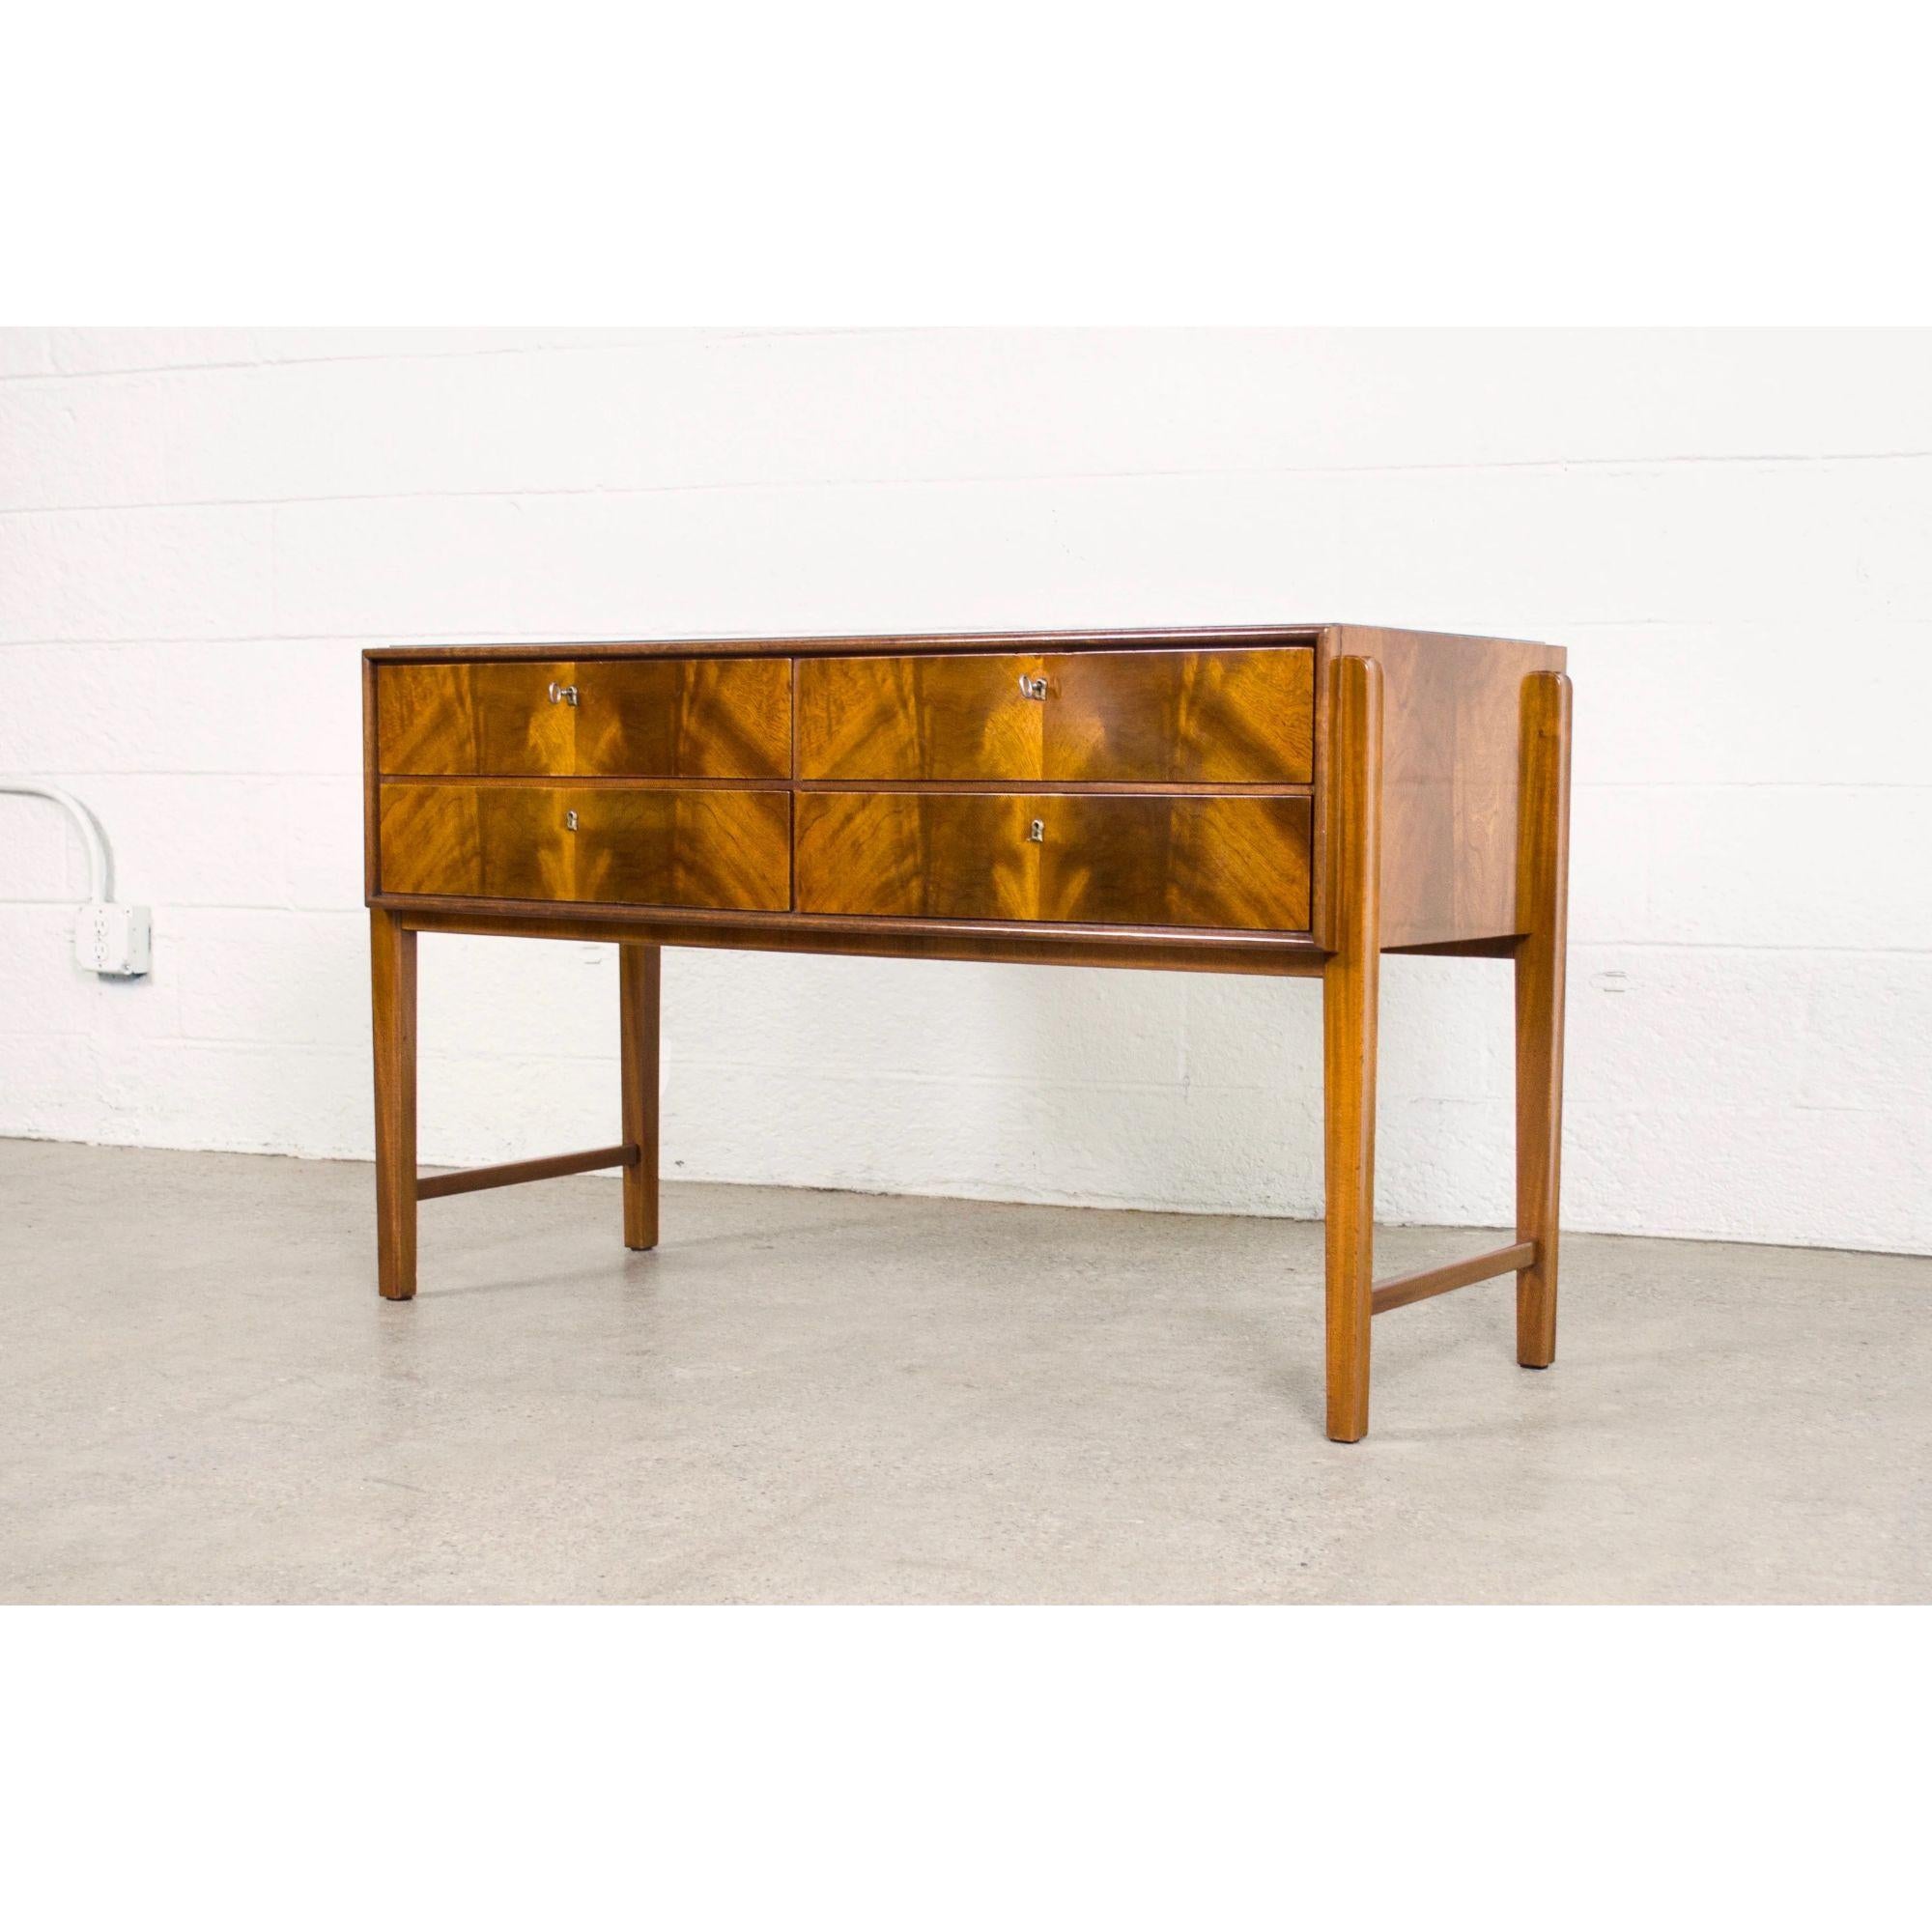 Midcentury burl wood sideboard credenza, 1960s.

This exceptional vintage mid century modern sideboard buffet circa 1960 is impeccably crafted and features a lacquered burlwood surface with stunning grain pattern and a recessed glass tabletop. The